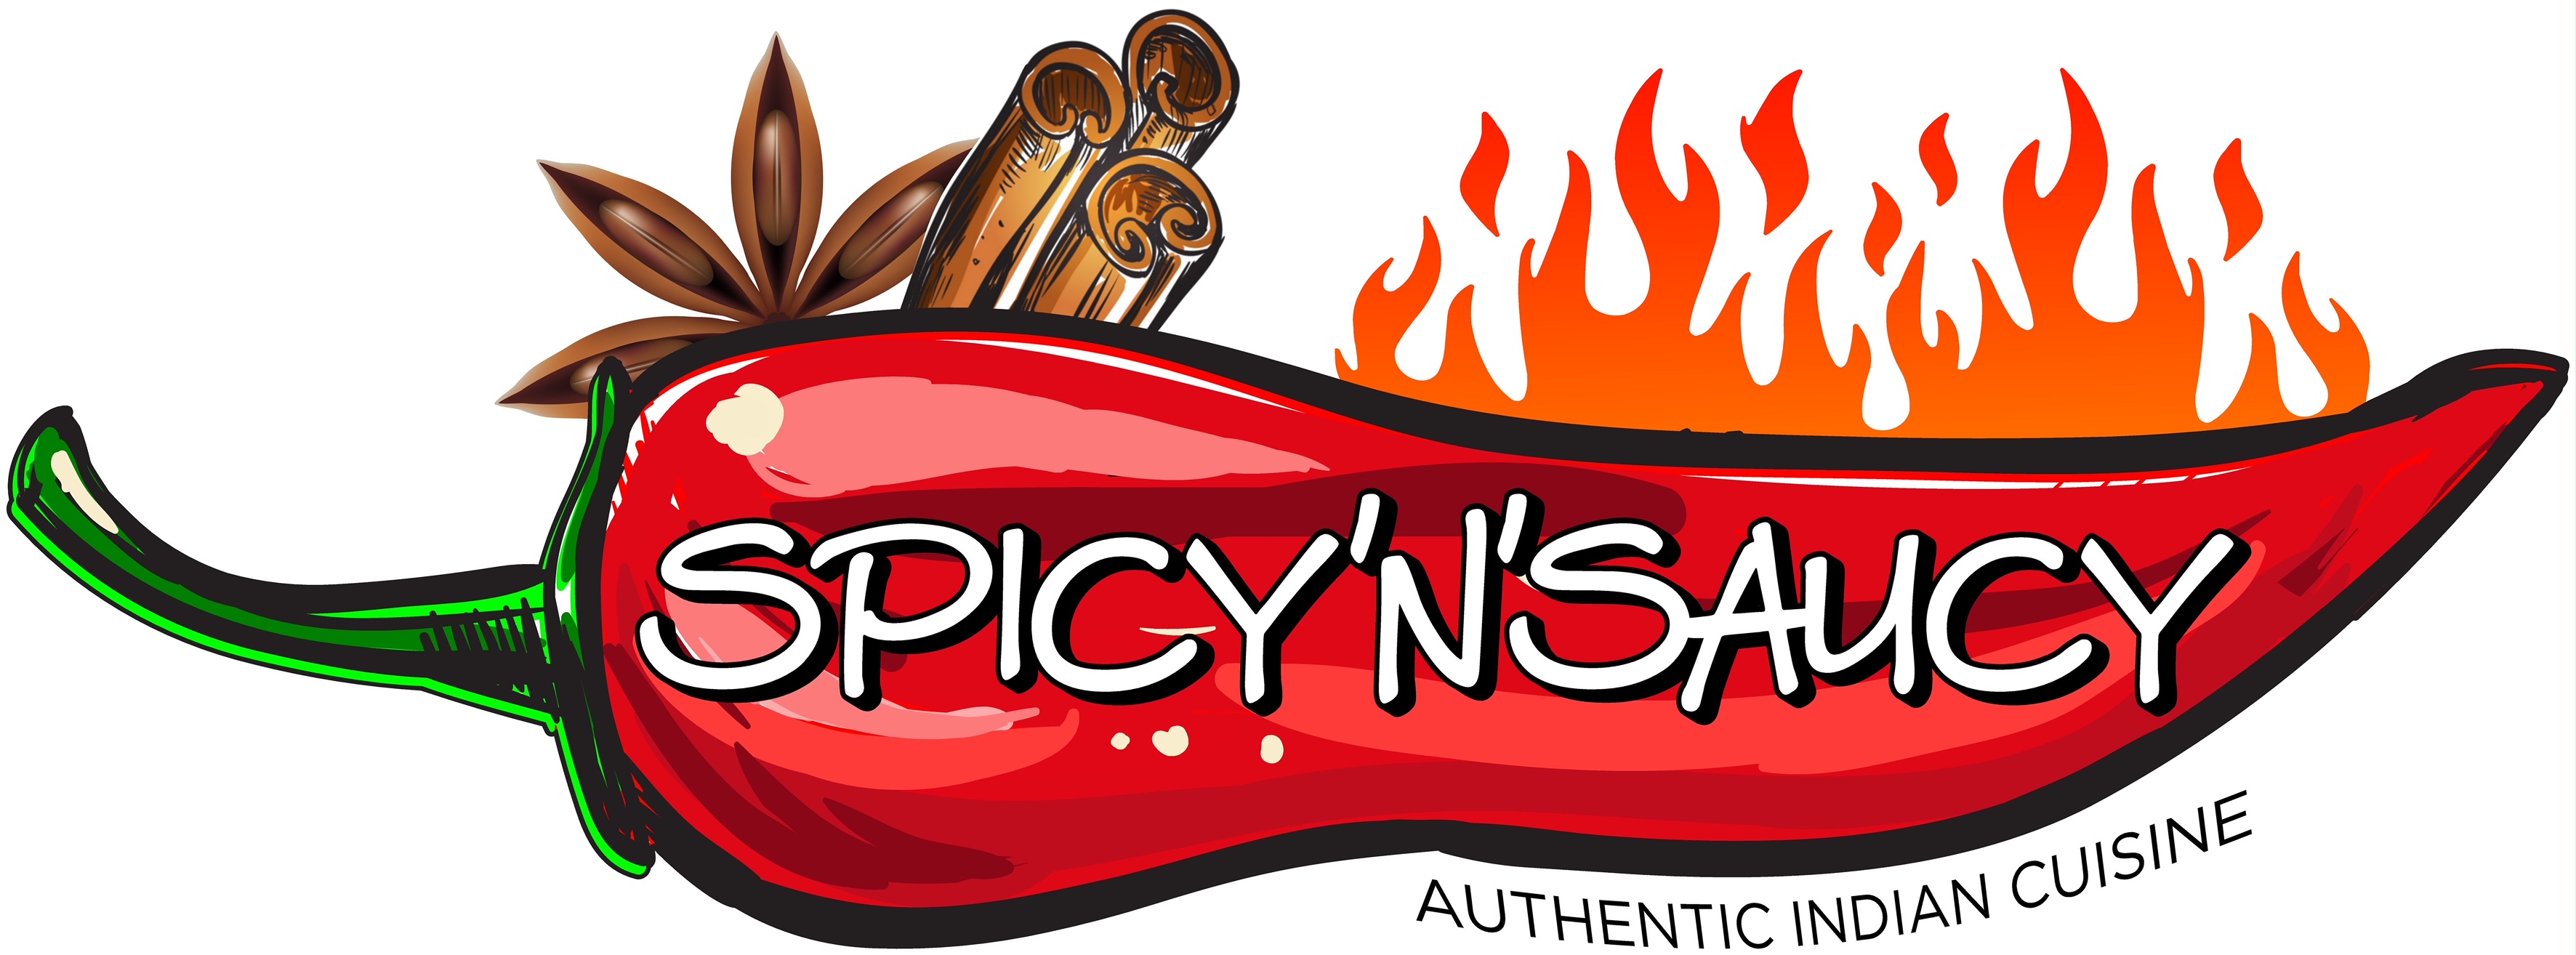 spicy-n-saucy